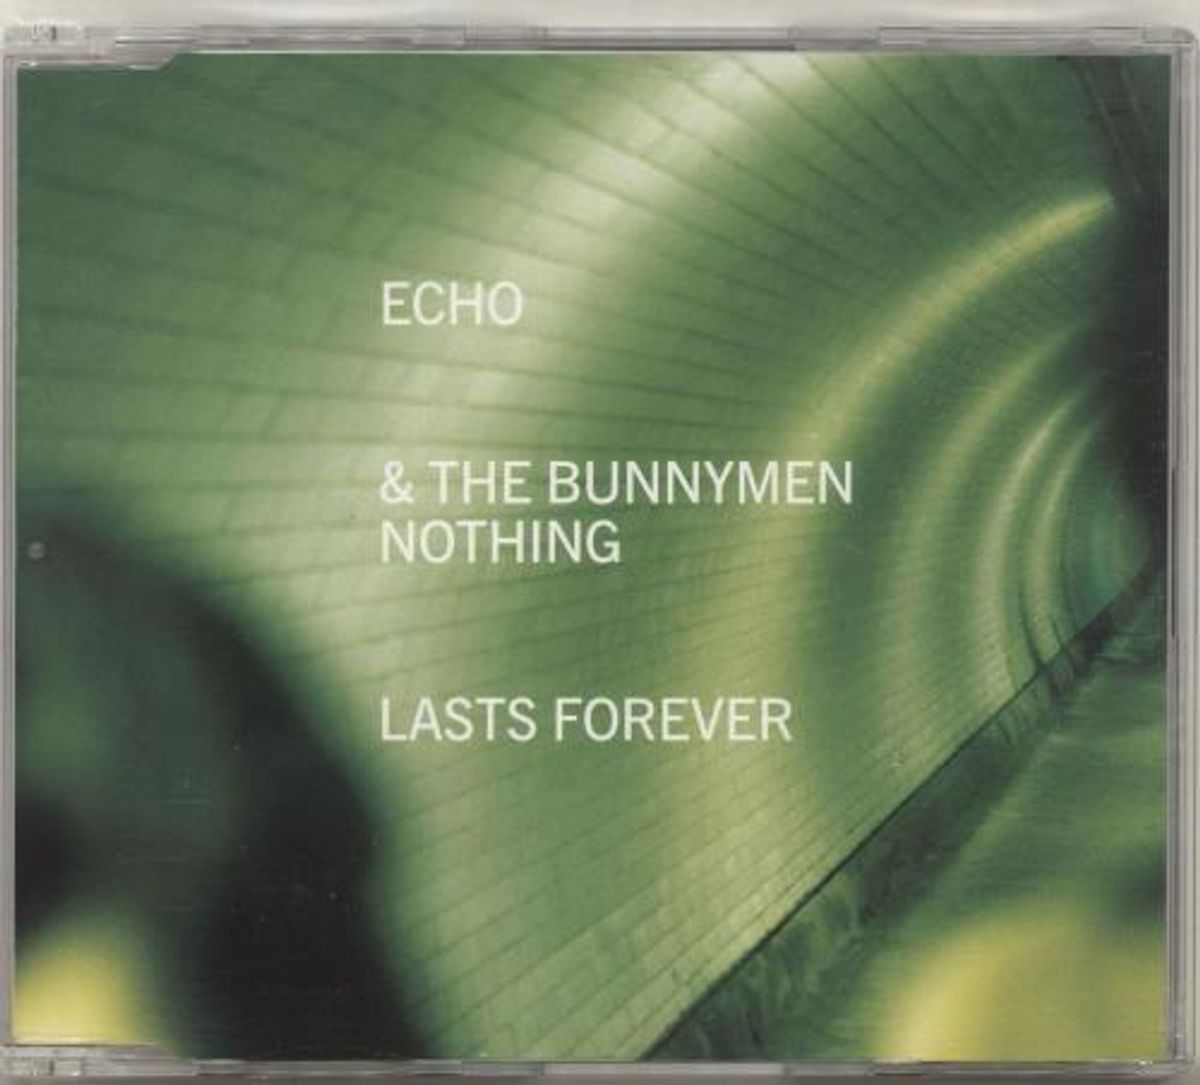 #LiverpoolAhoy - Echo & the Bunnymen - Nothing Lasts Forever (1997)